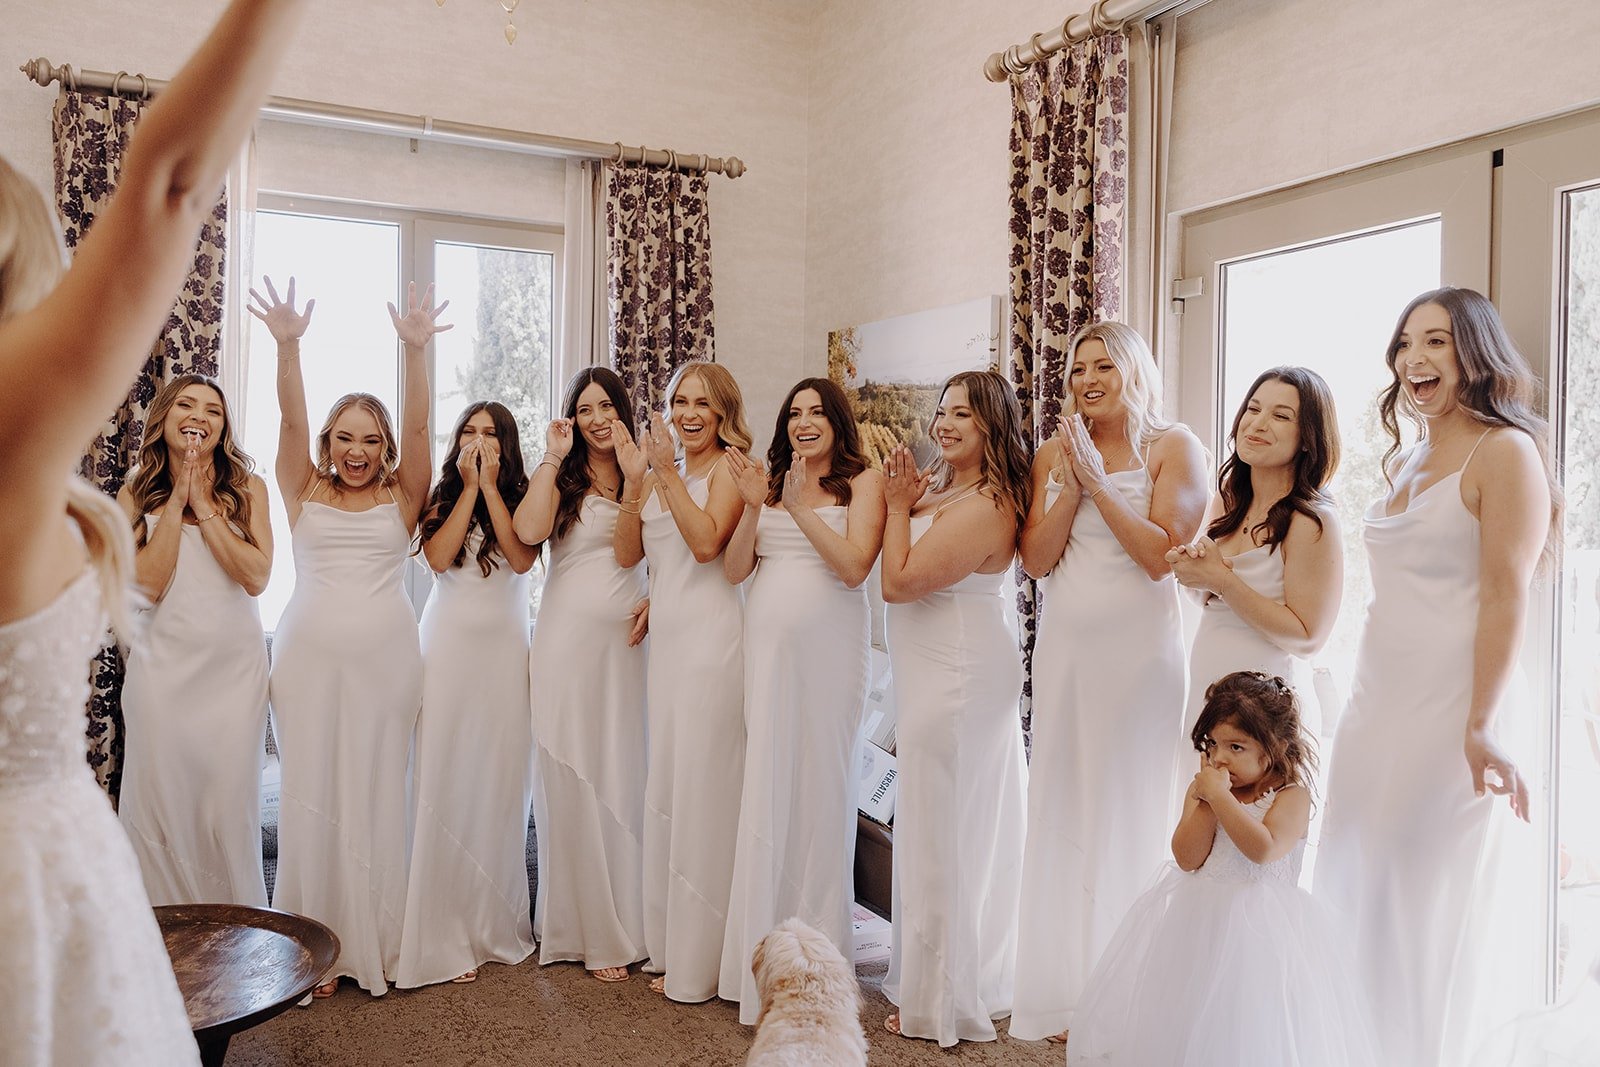 Bridal party reacts to first look with bride at Aletto luxury wedding venue in California